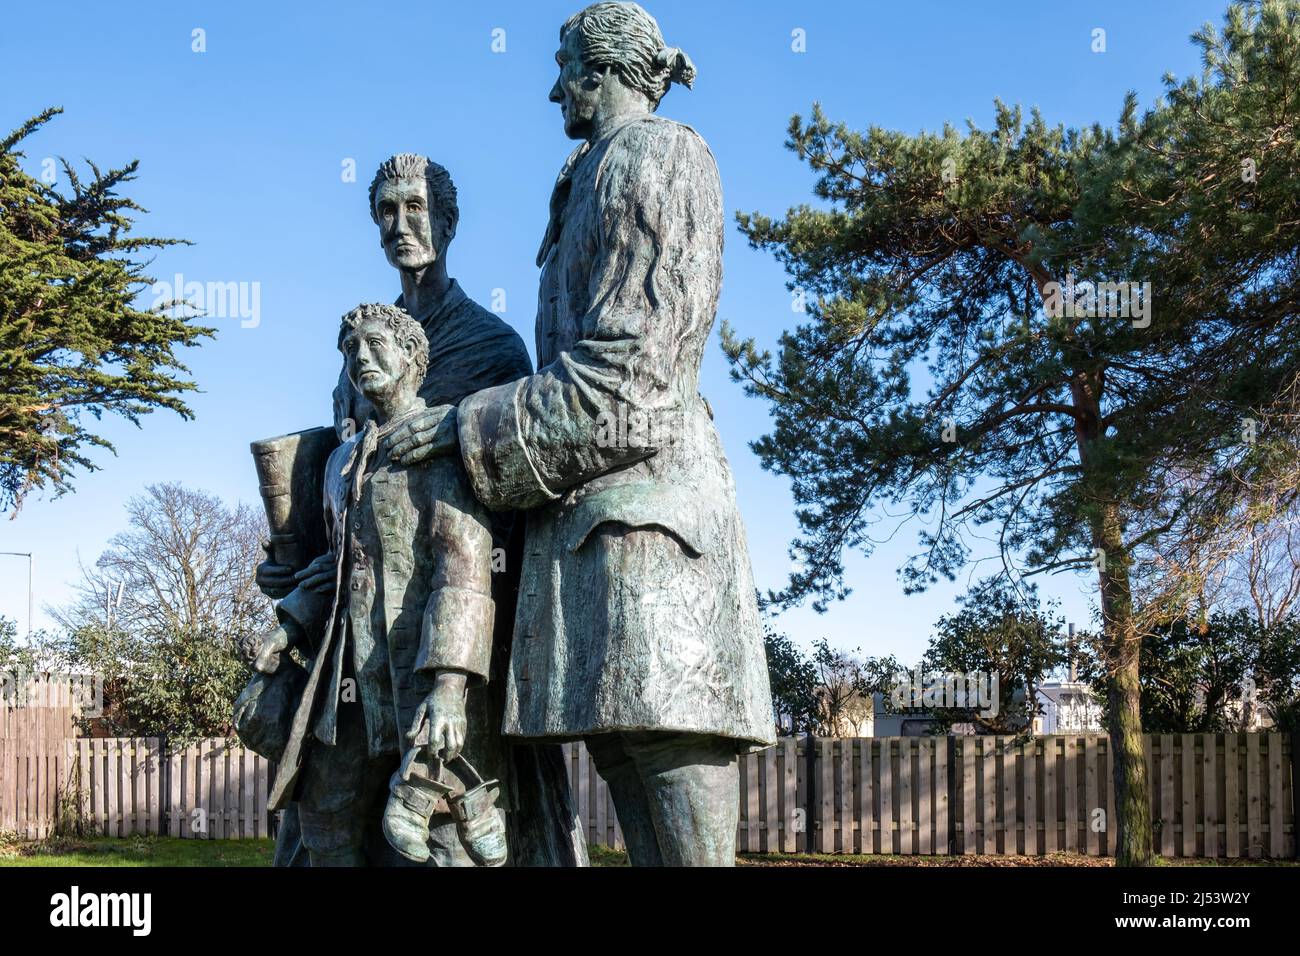 The Friends' Goodwill Memorial sculpture in Curran Park in the County Antrim town of Larne Northern Ireland. Stock Photo